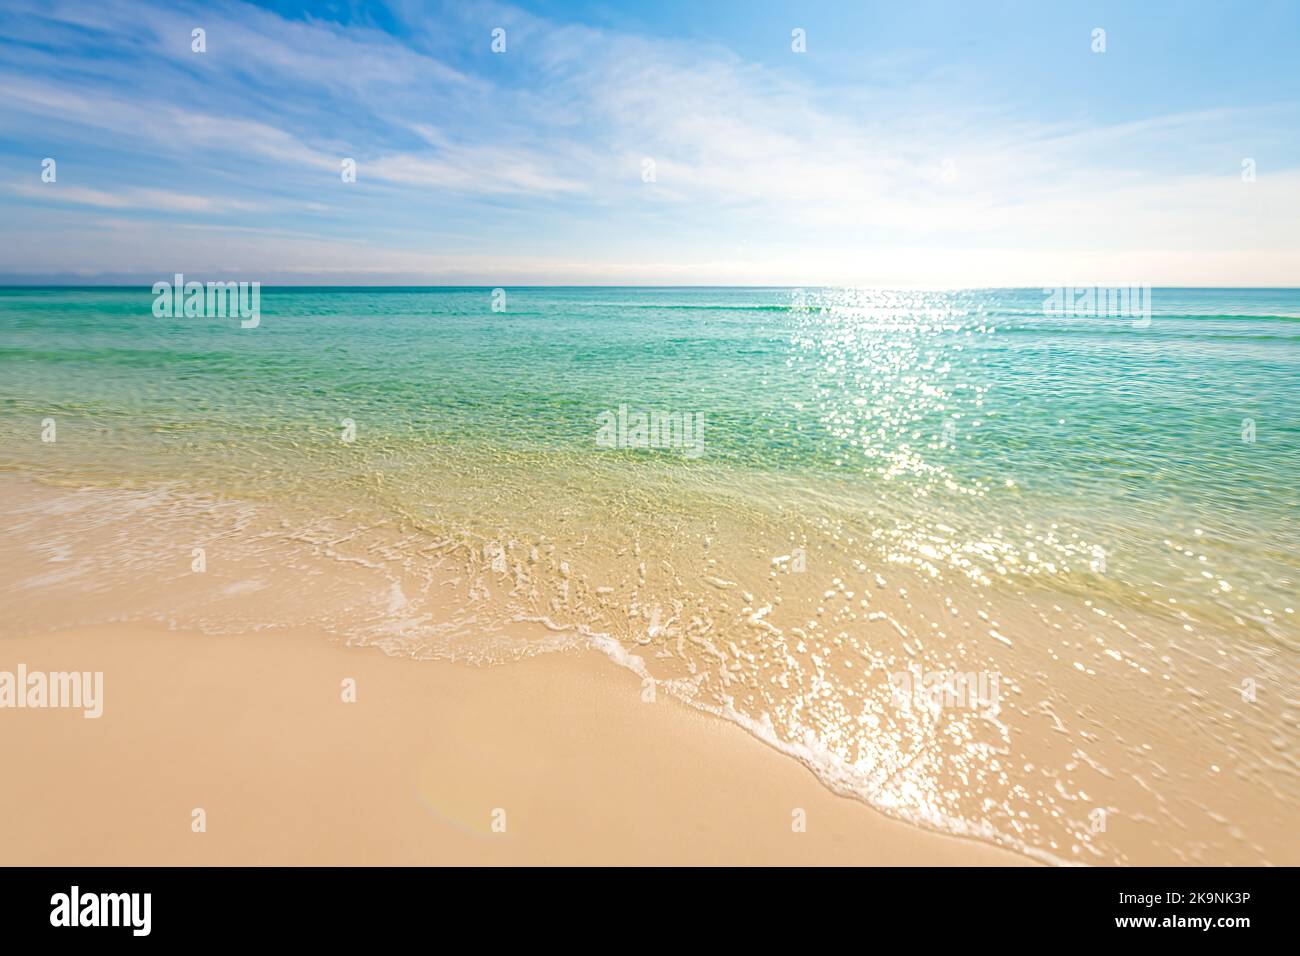 Shiny glitter shimmer waves with sun reflections on Gulf of Mexico ocean water with small ripples on sunny day at city of Miramar, Florida panhandle Stock Photo